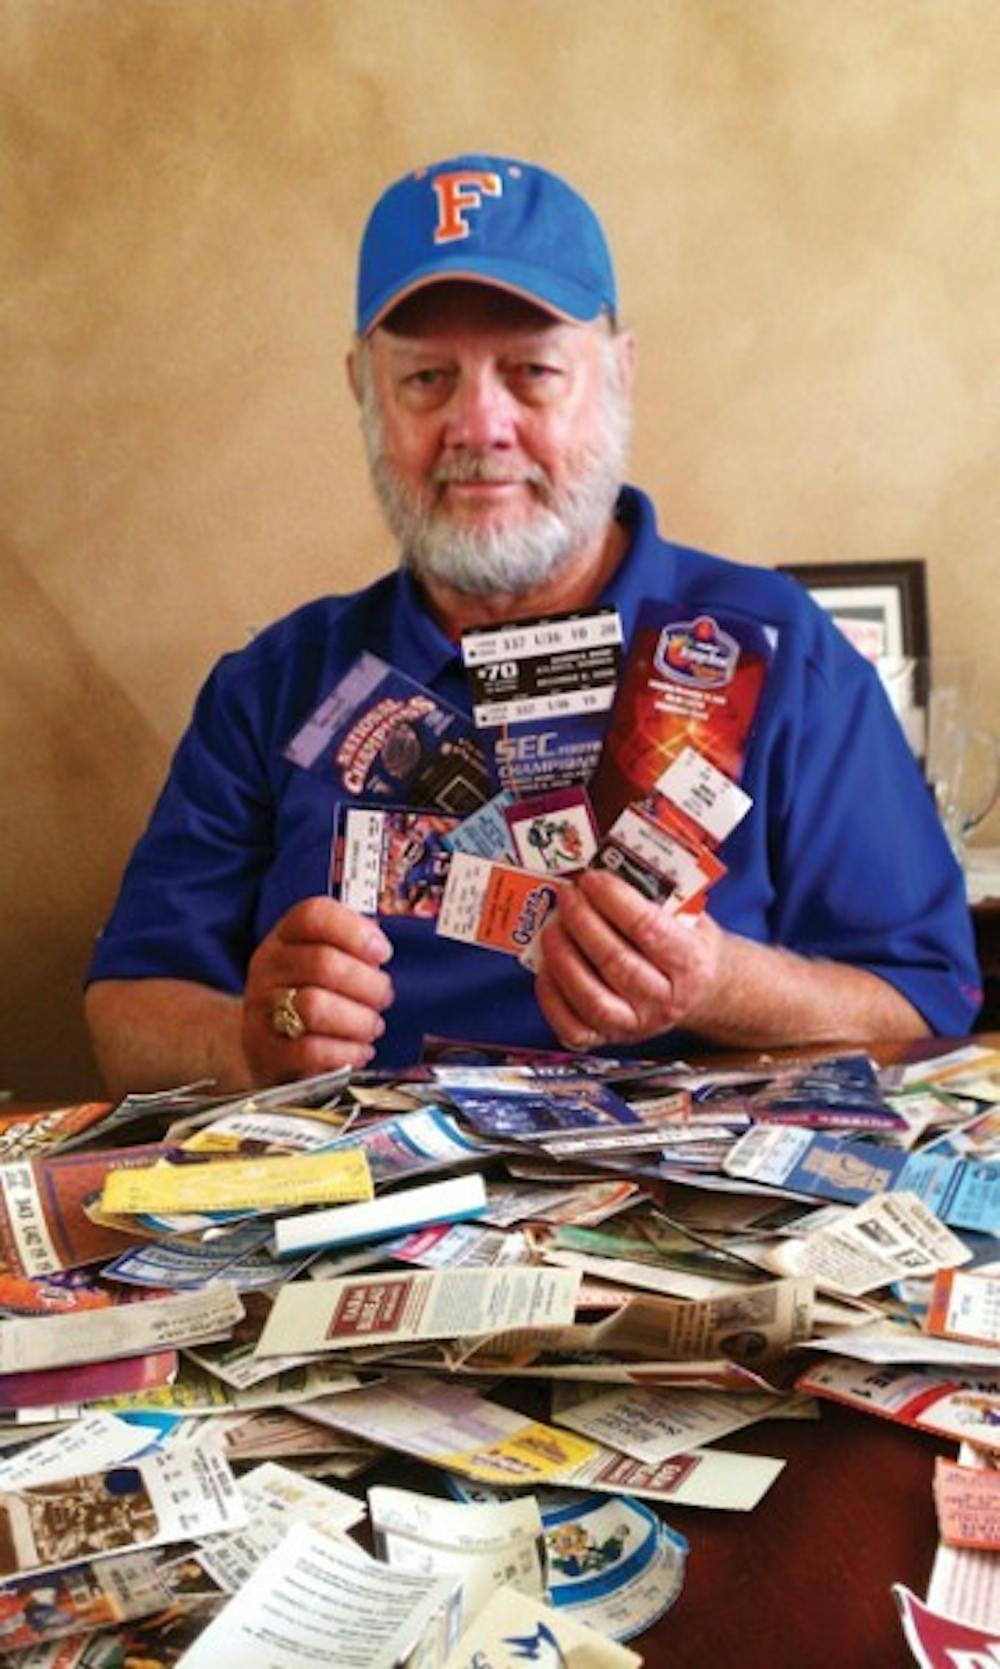 <p>Don Crews shows off his UF football ticket stubs. On Saturday, he attended his 500th Gators football game.</p>